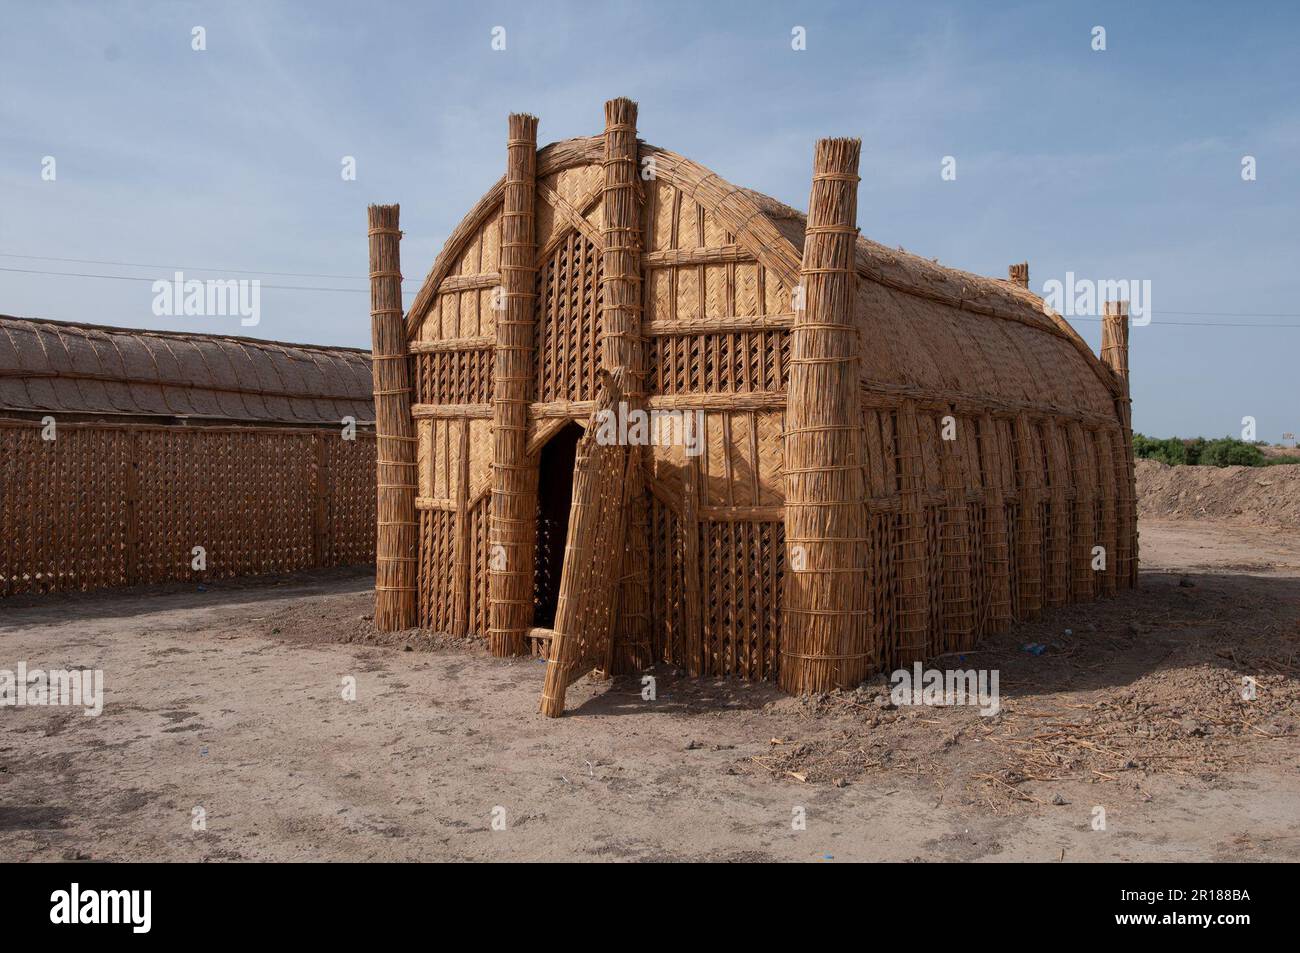 A traditional reed built Mudhif, Southern Iraq Stock Photo